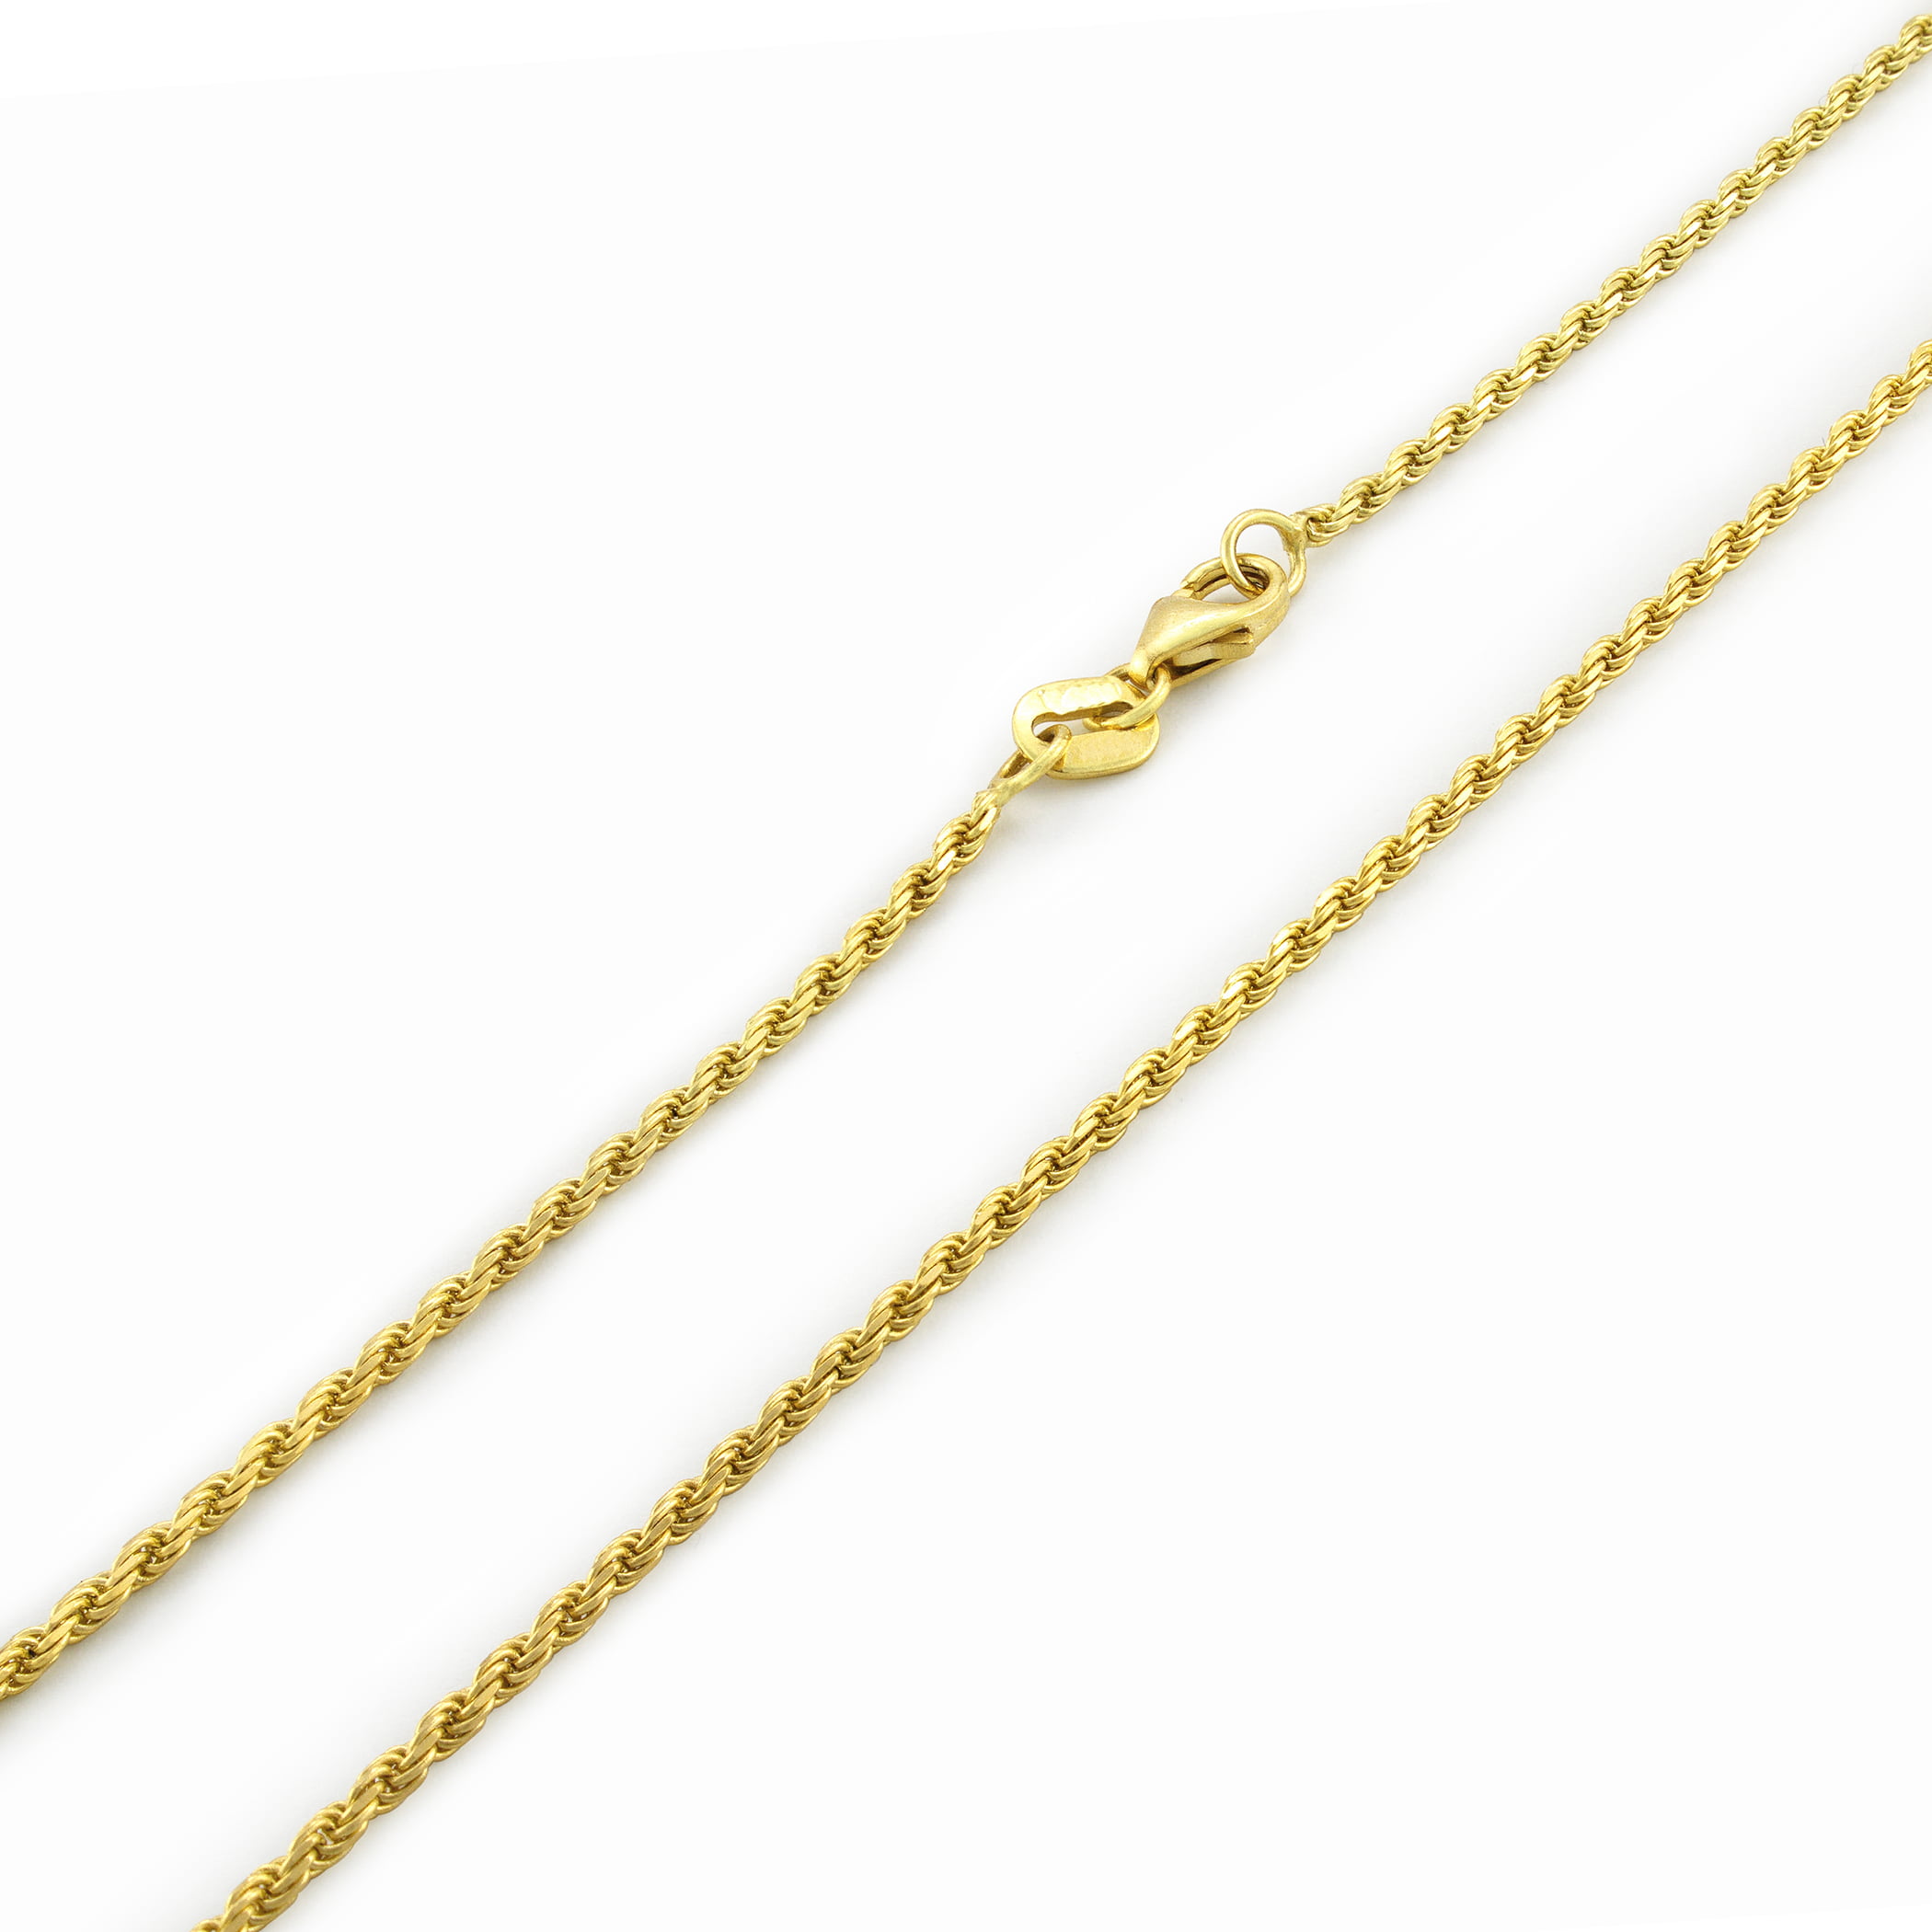 NuraGold - 14k Yellow Gold 1.8mm Solid Rope Chain Pendant Necklace